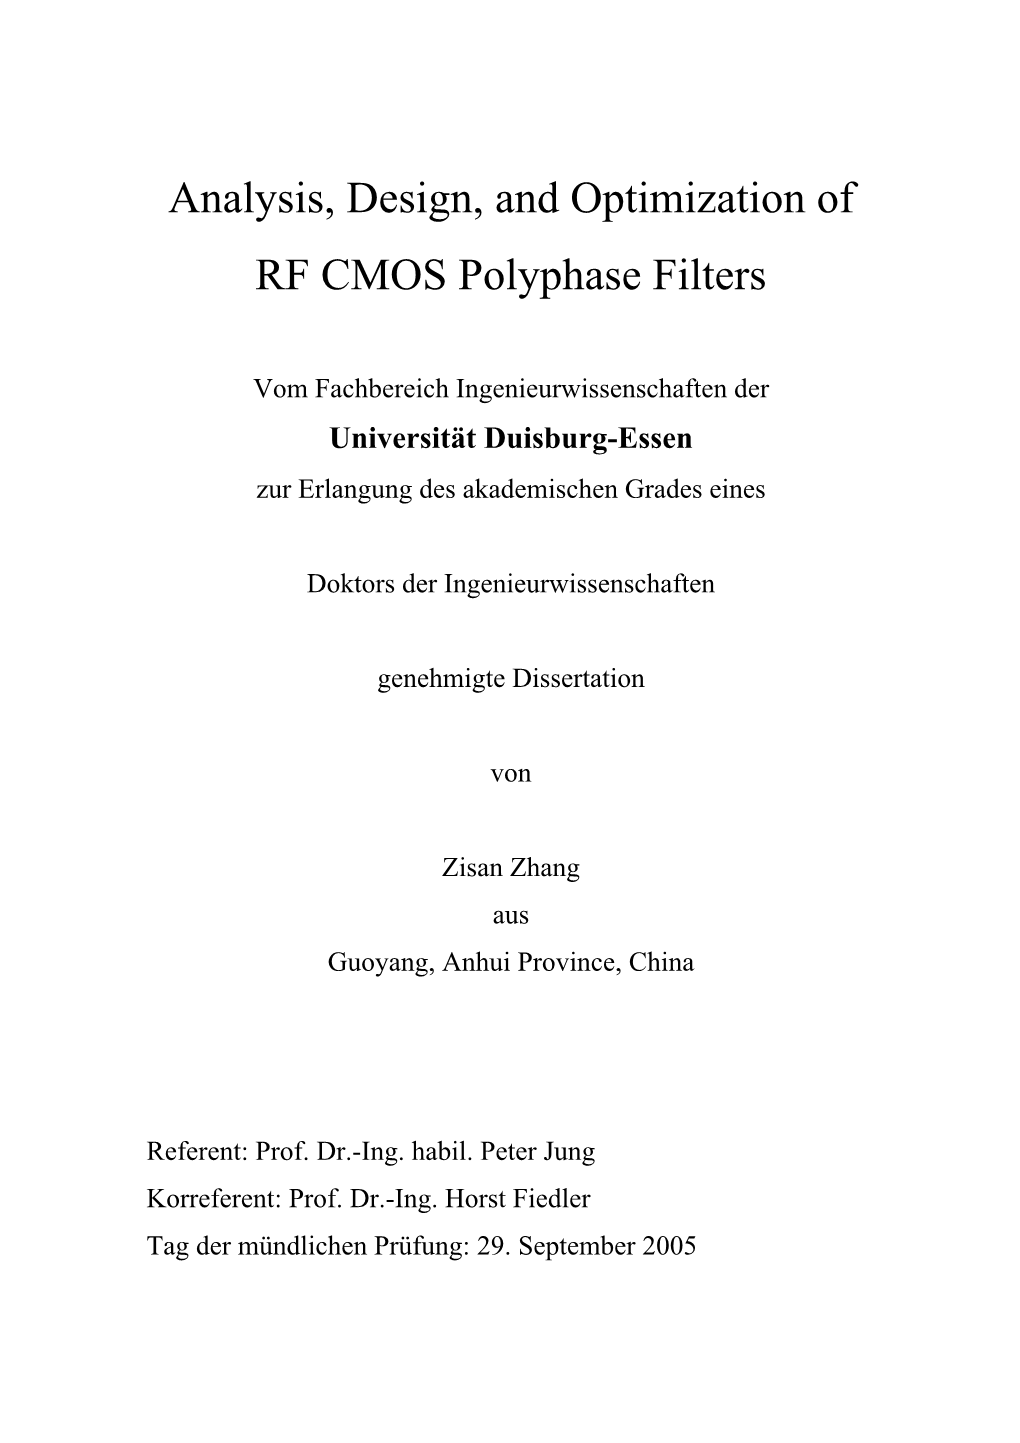 Analysis, Design, and Optimization of RF CMOS Polyphase Filters